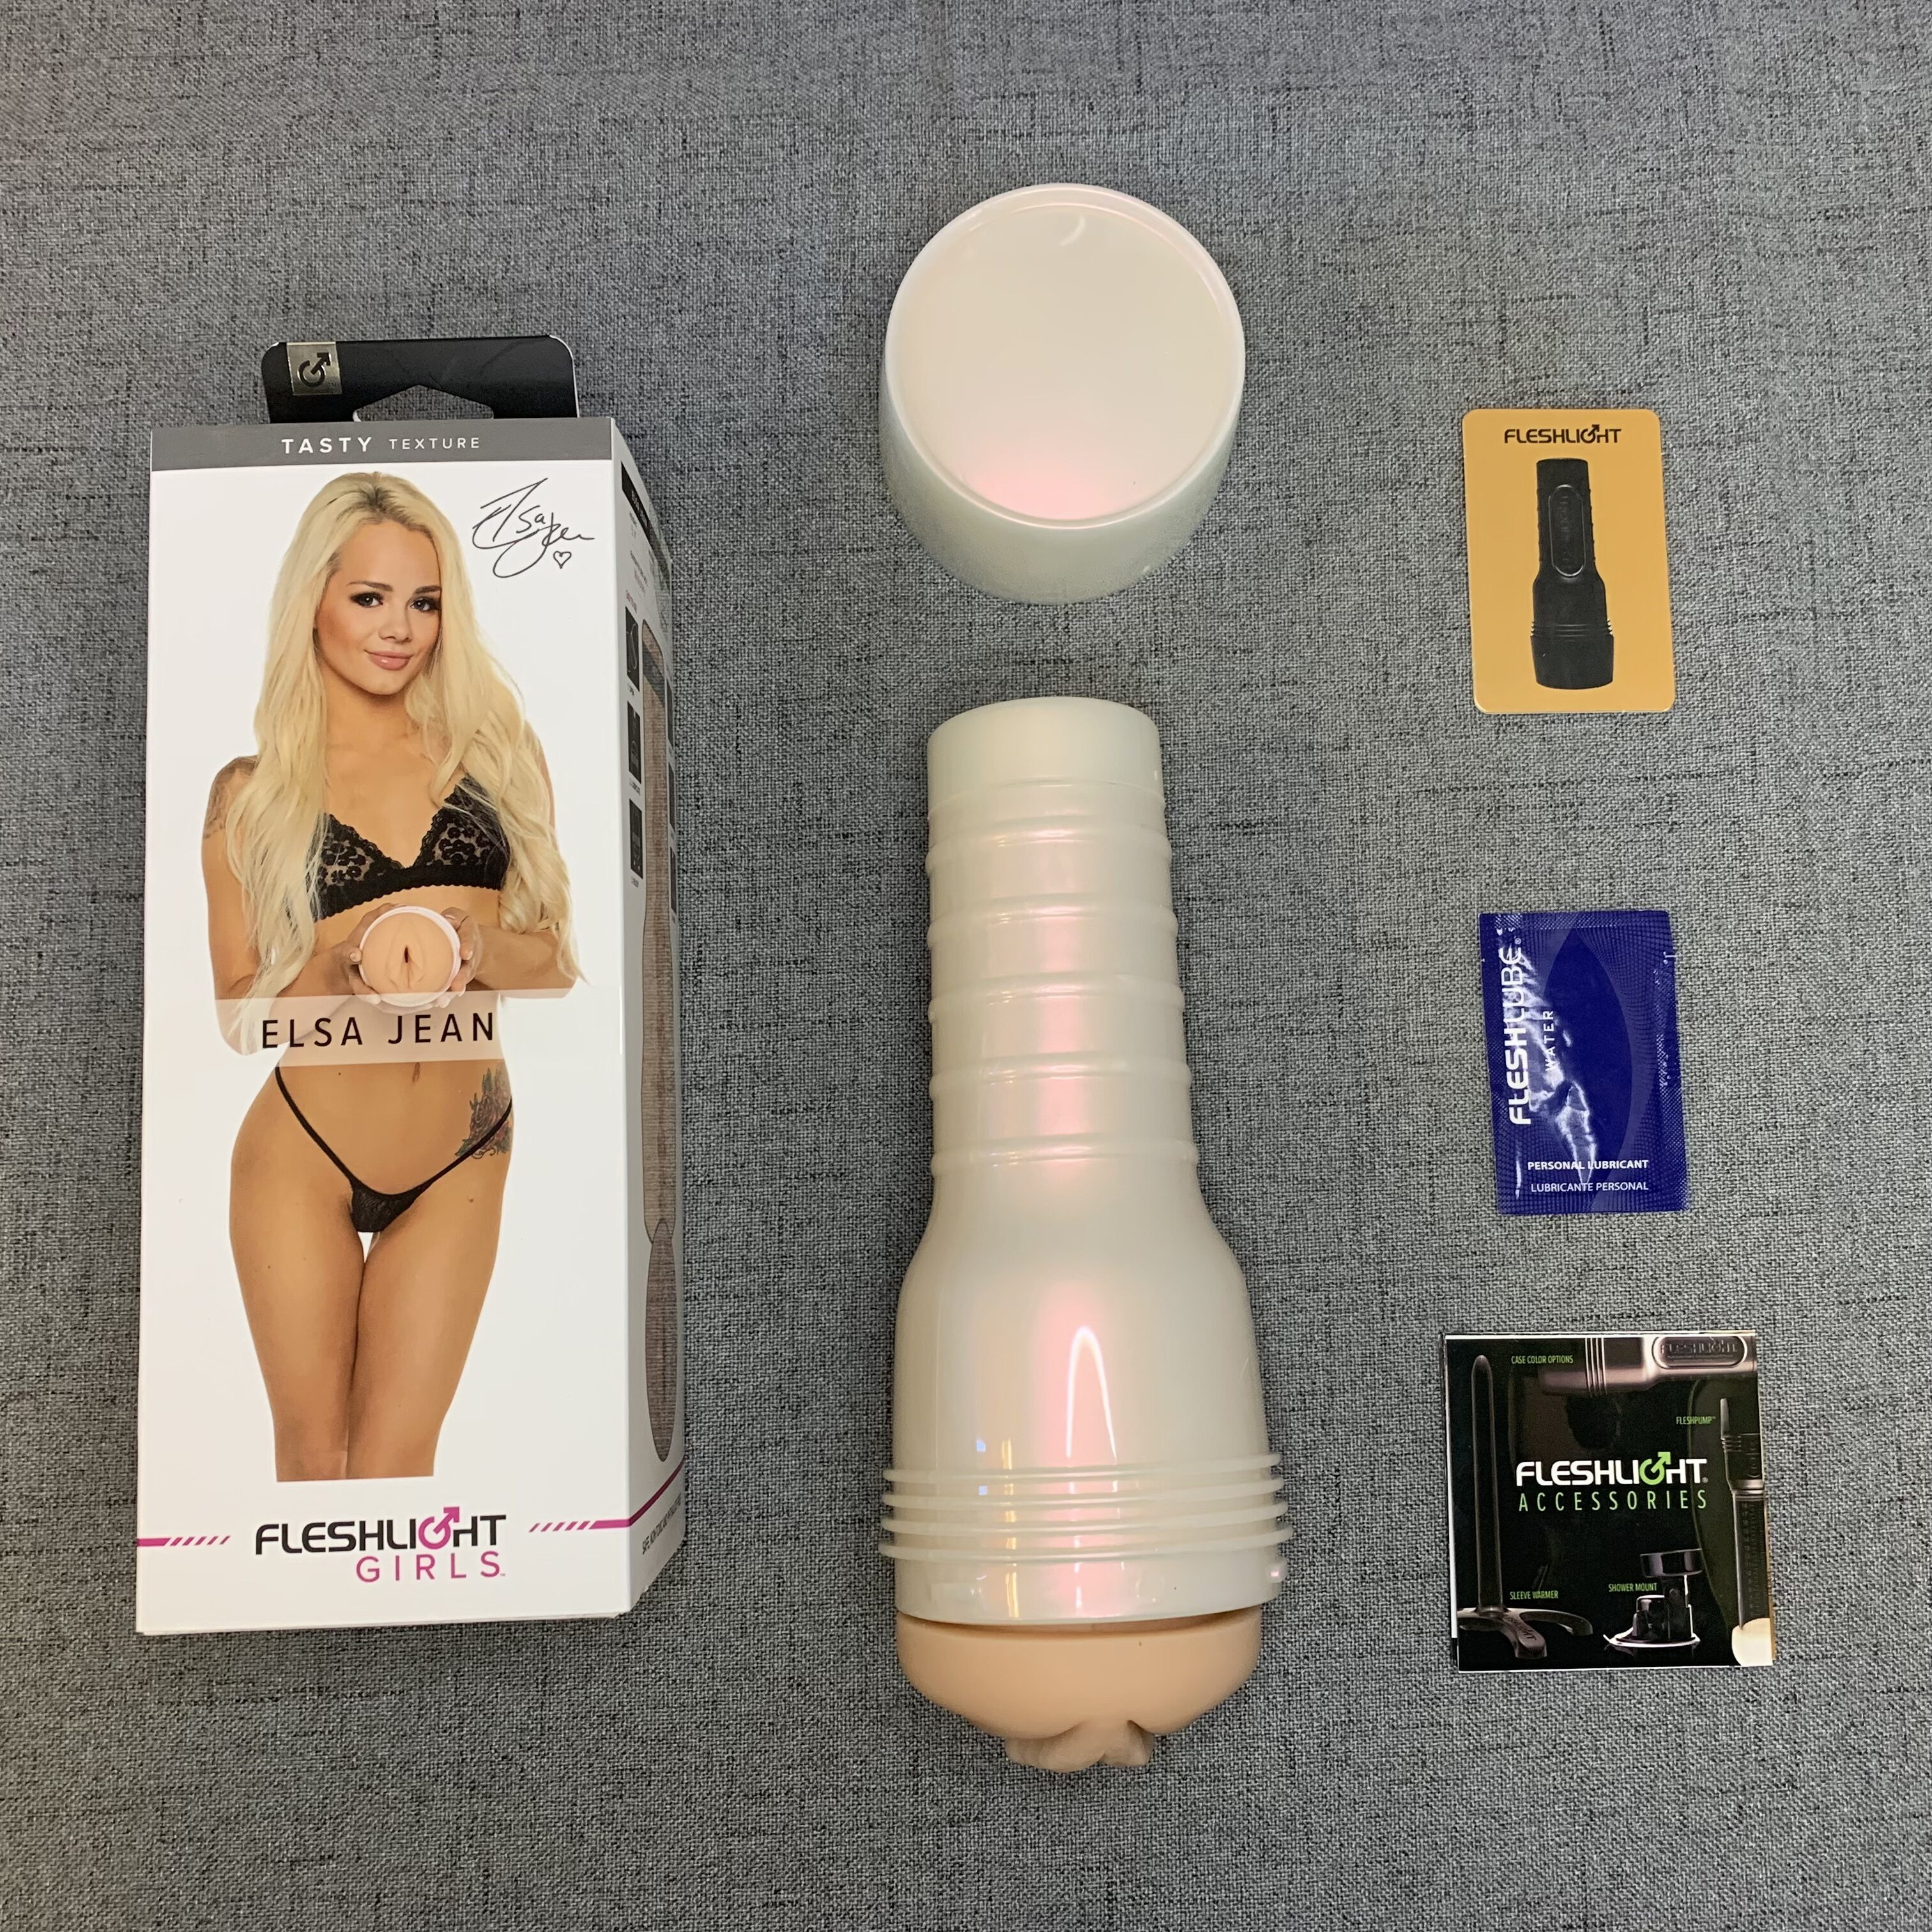 Specifications and features Elsa Jean Fleshlight Tasty 